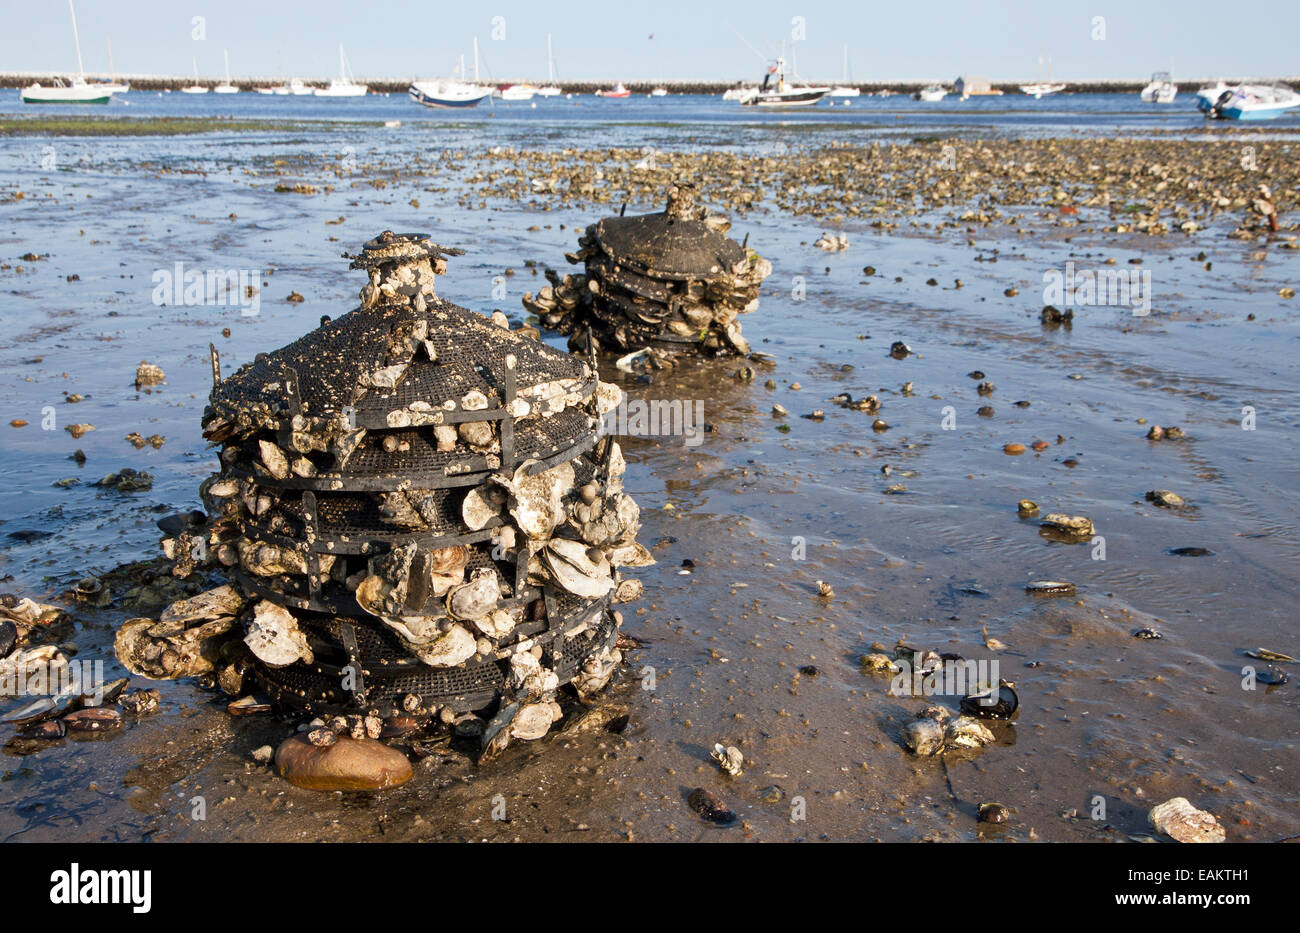 Oyster aquaculture 'China Caps' in Cape Cod Bay used to collect larvae from spawning oysters for use by aquaculture farming. Stock Photo